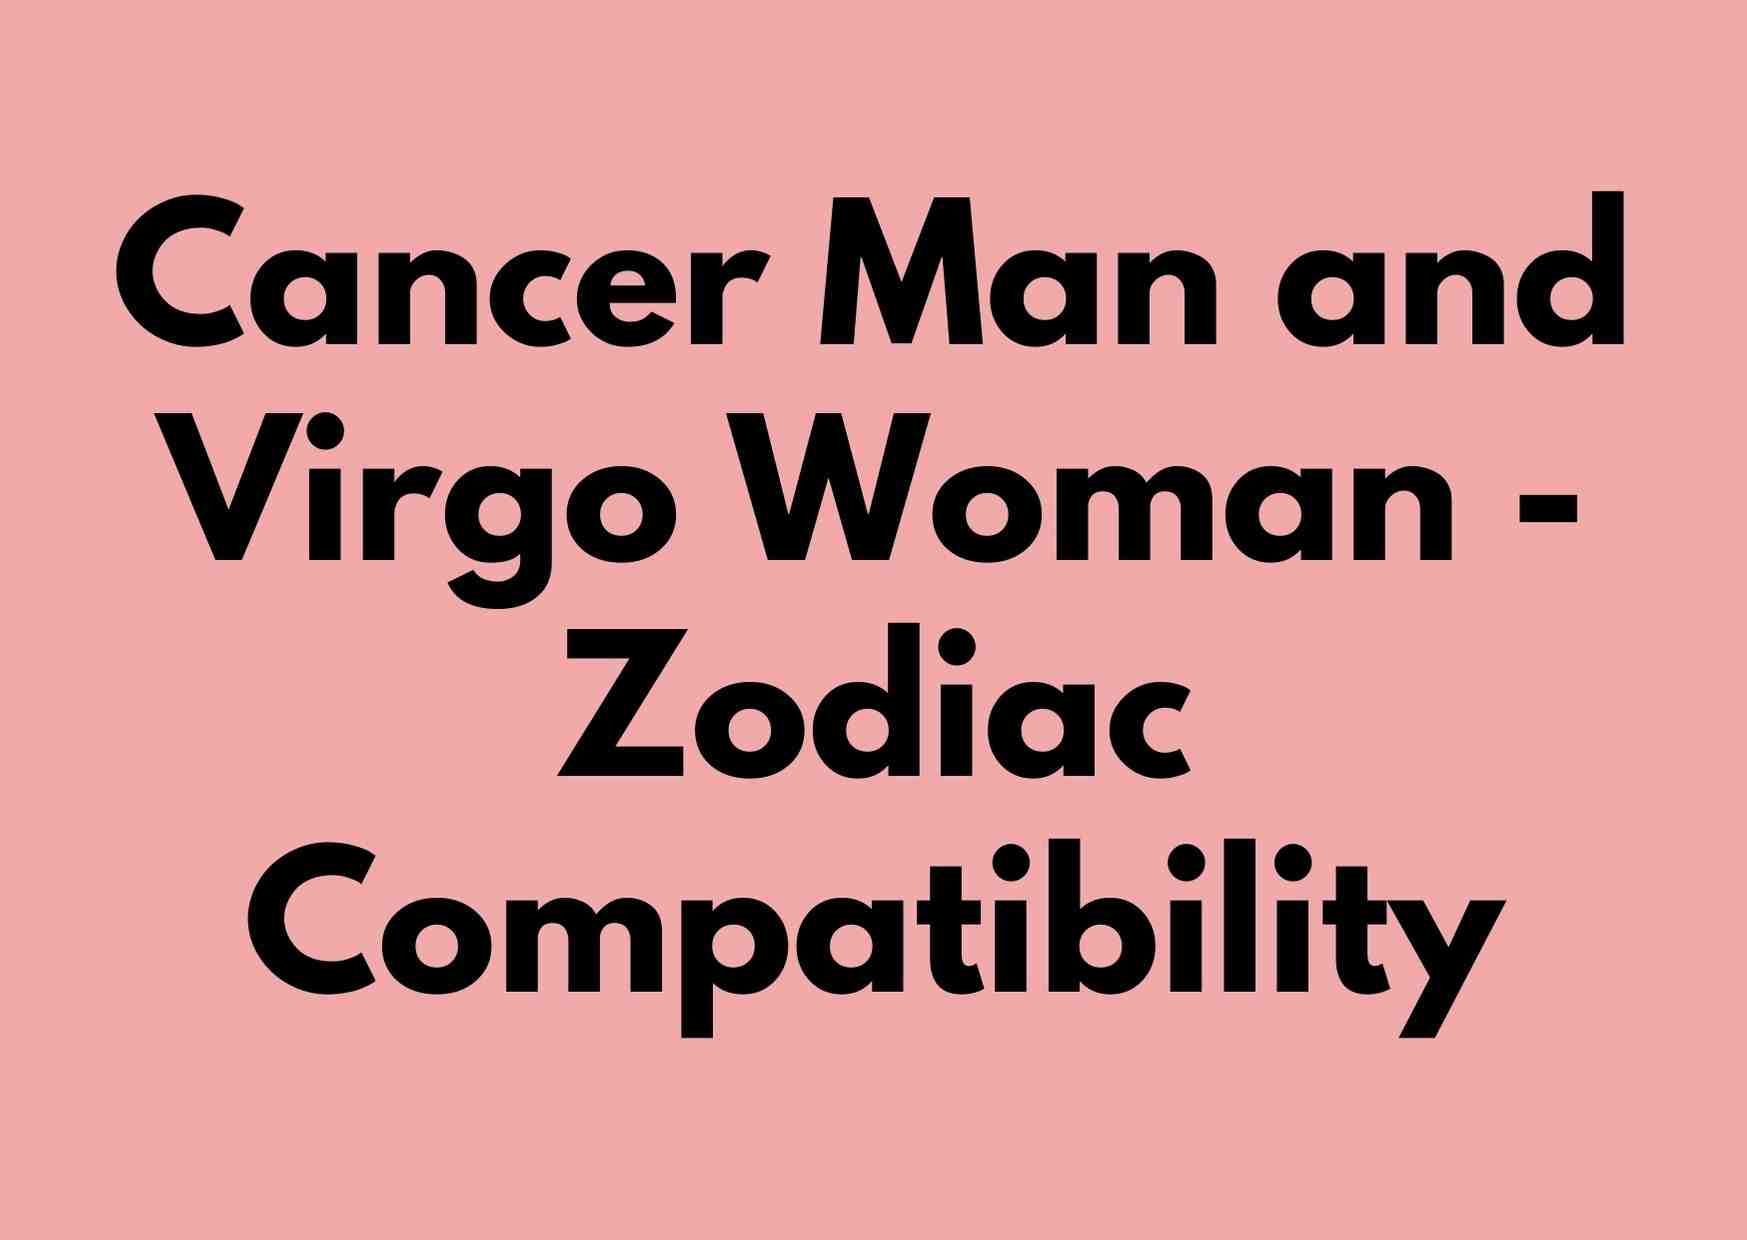 Cancer Man and Virgo Woman - Zodiac Compatibility